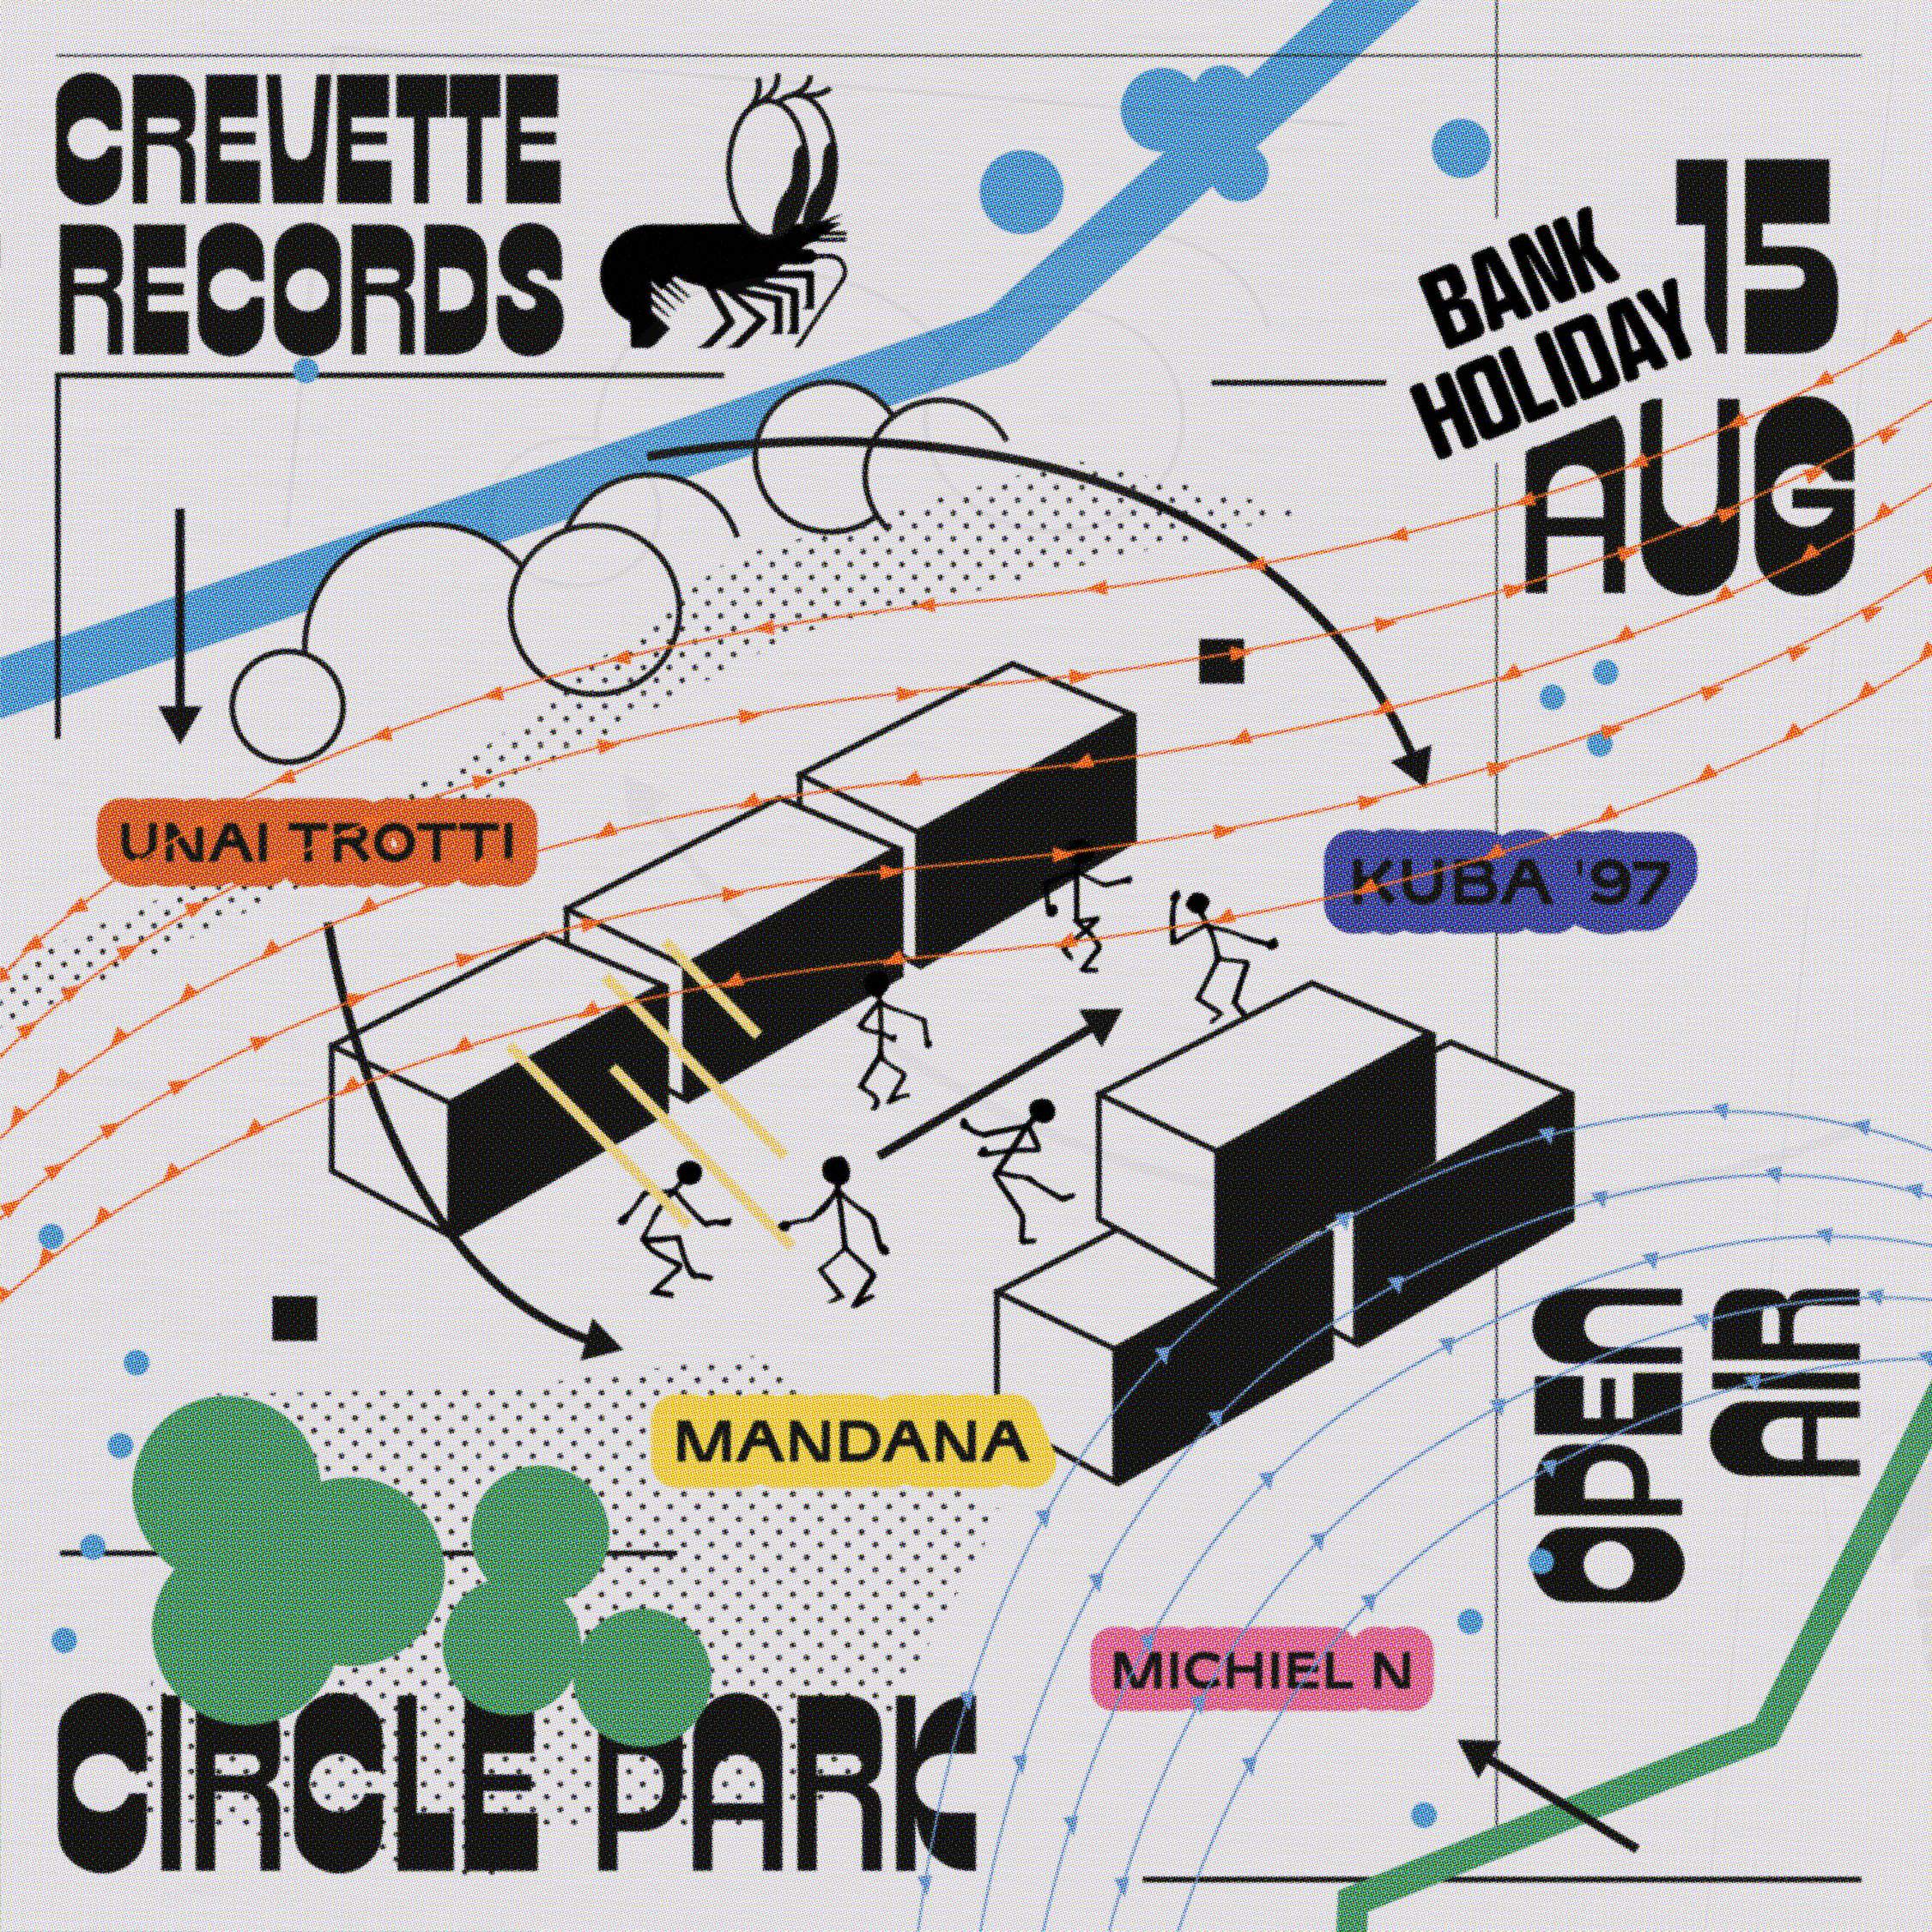 BANK HOLIDAY • OPEN AIR ～ CREVETTE RECORDS - フライヤー表